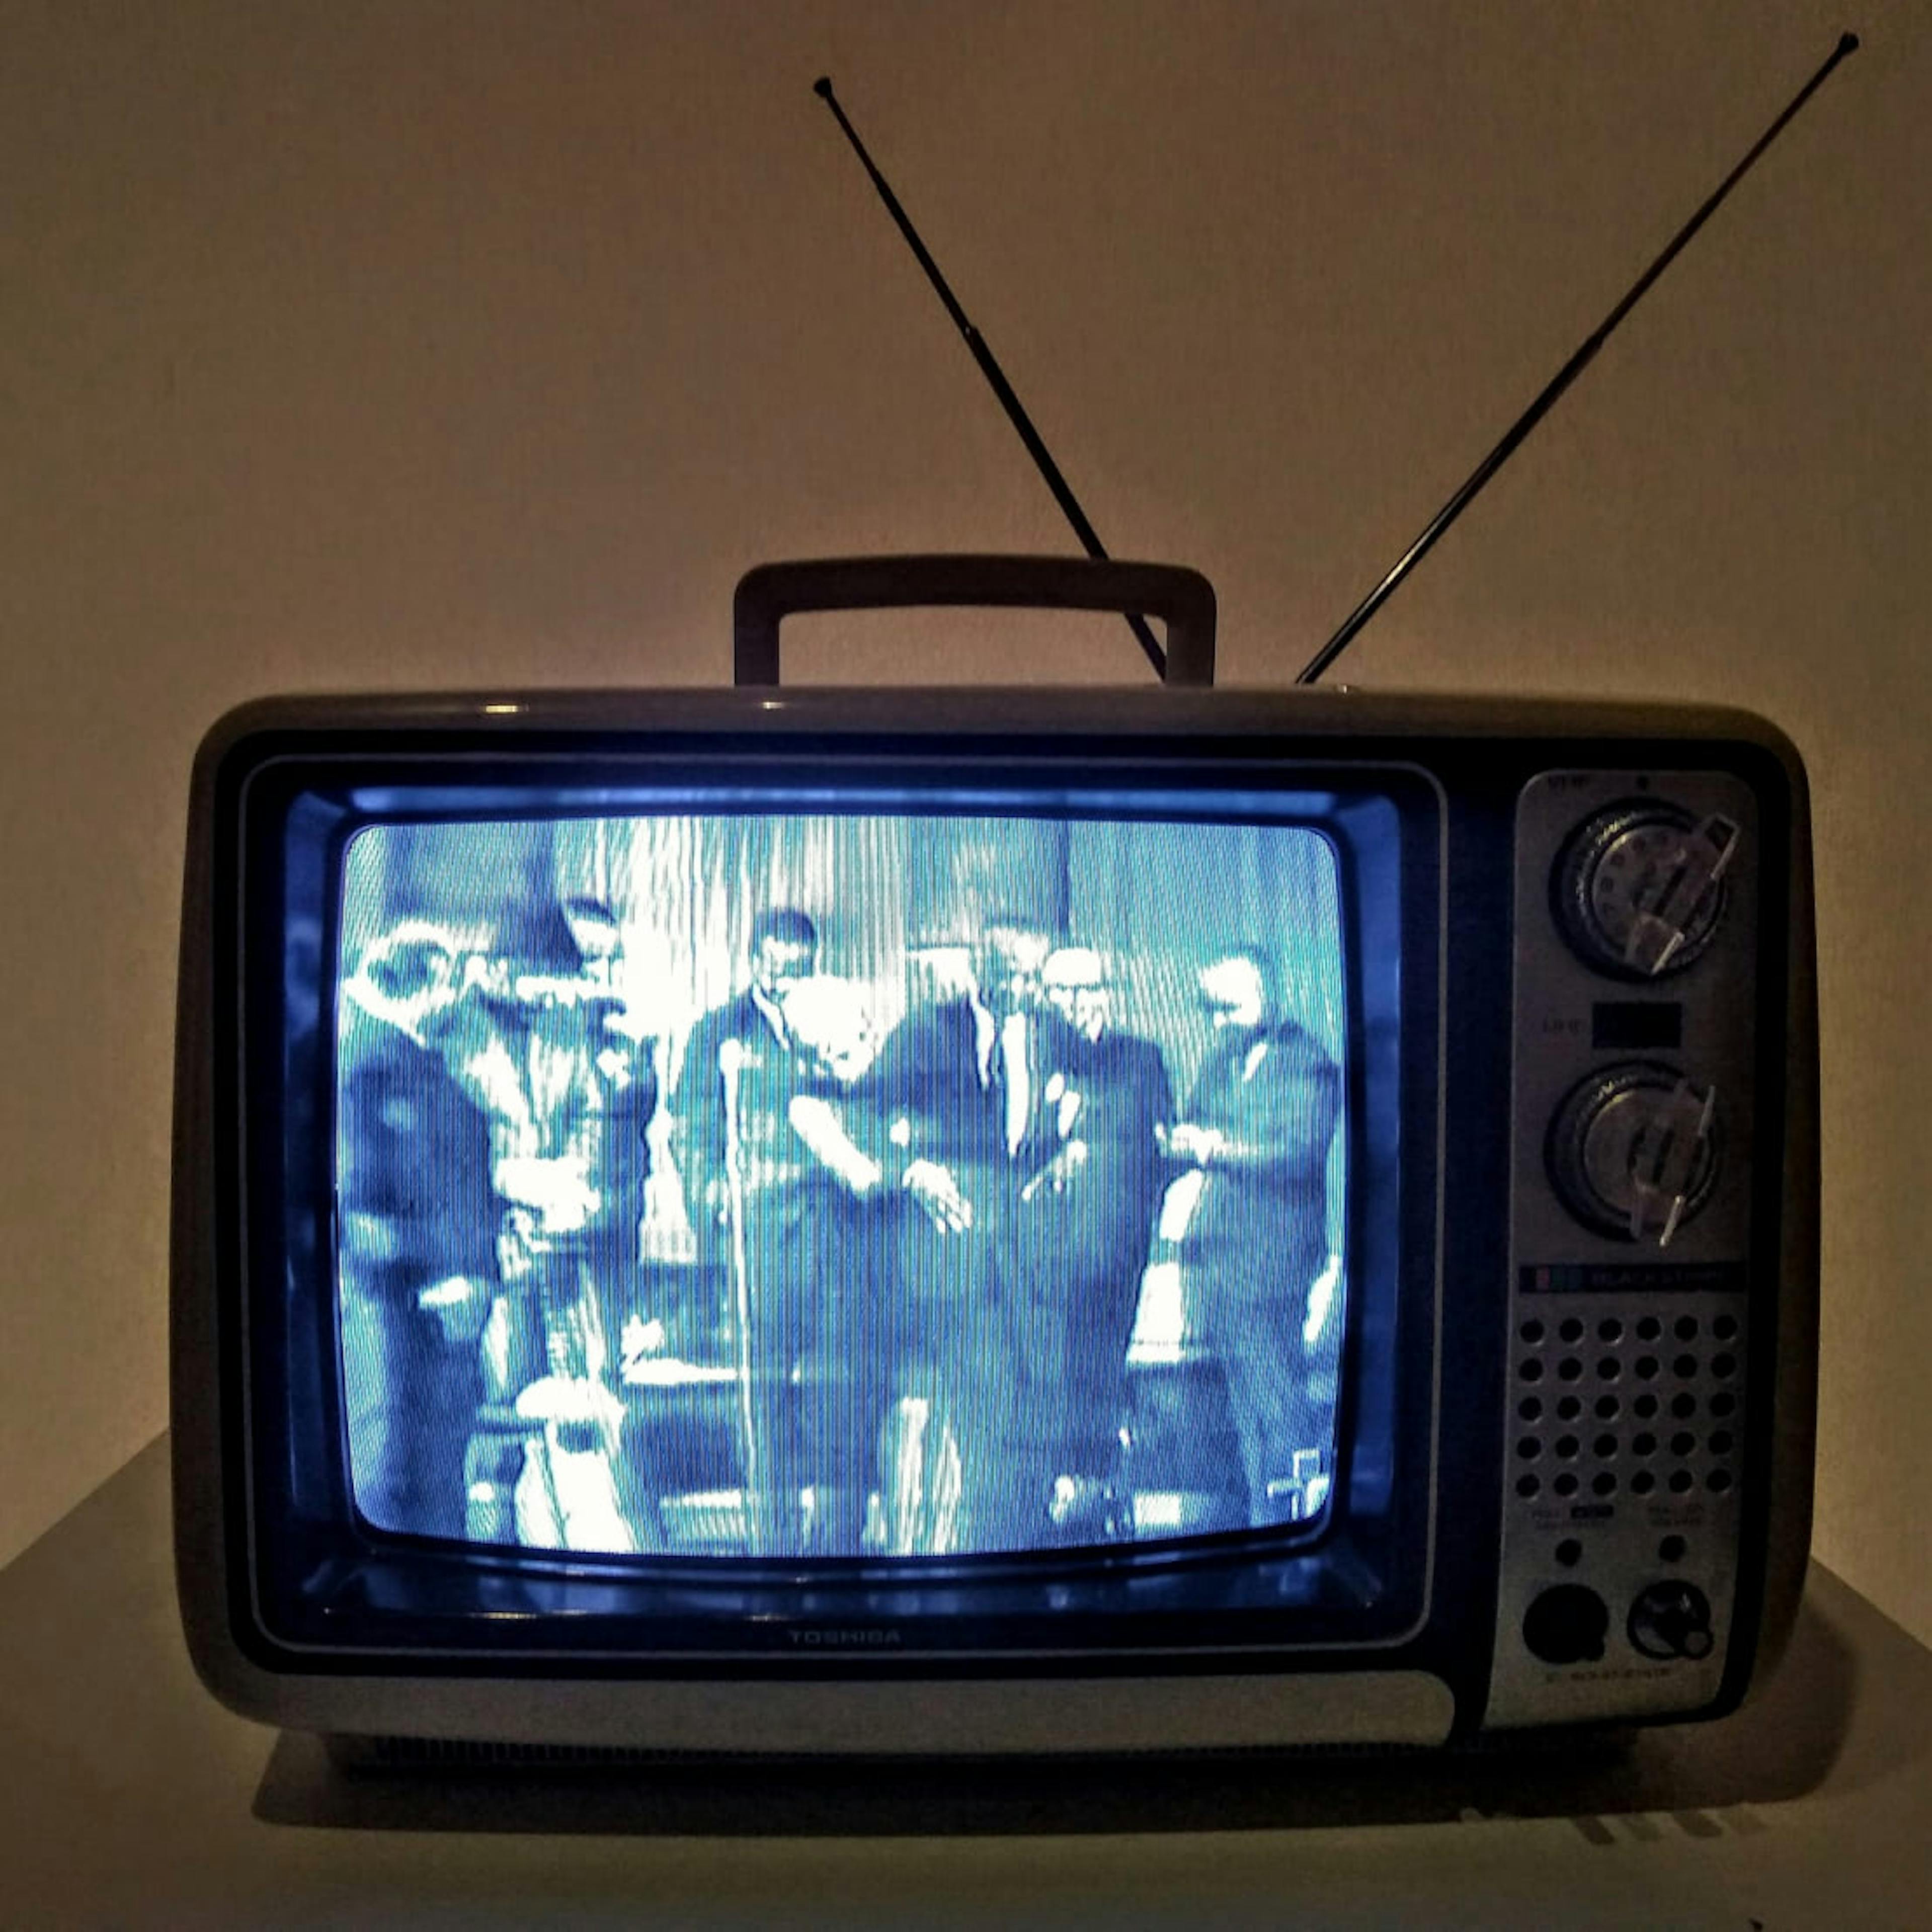 An old television with only five channels.